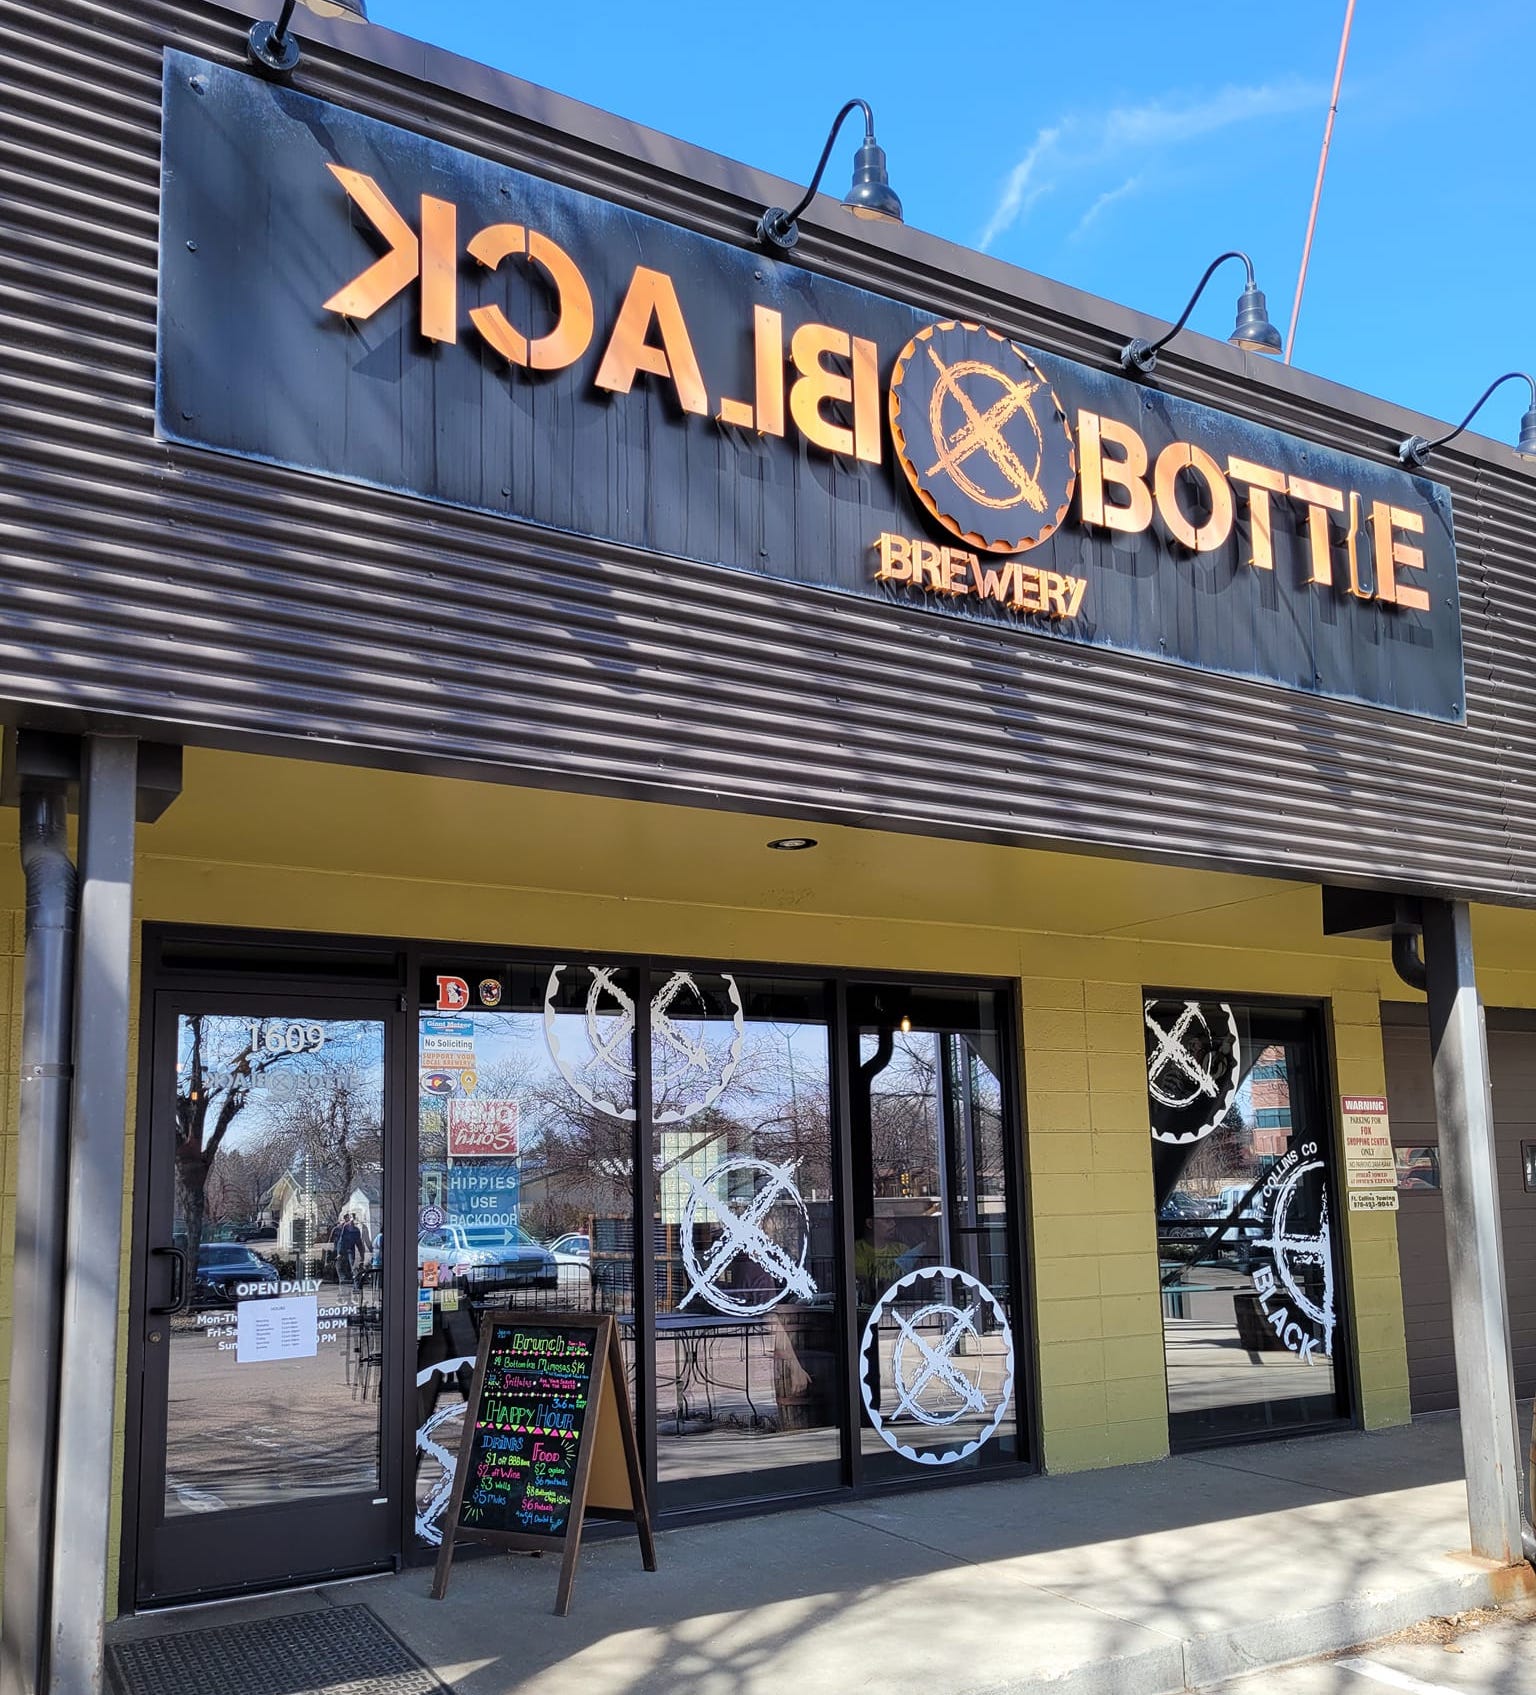 Image of the Black Bottle Brewery in Fort Collins, Colorado